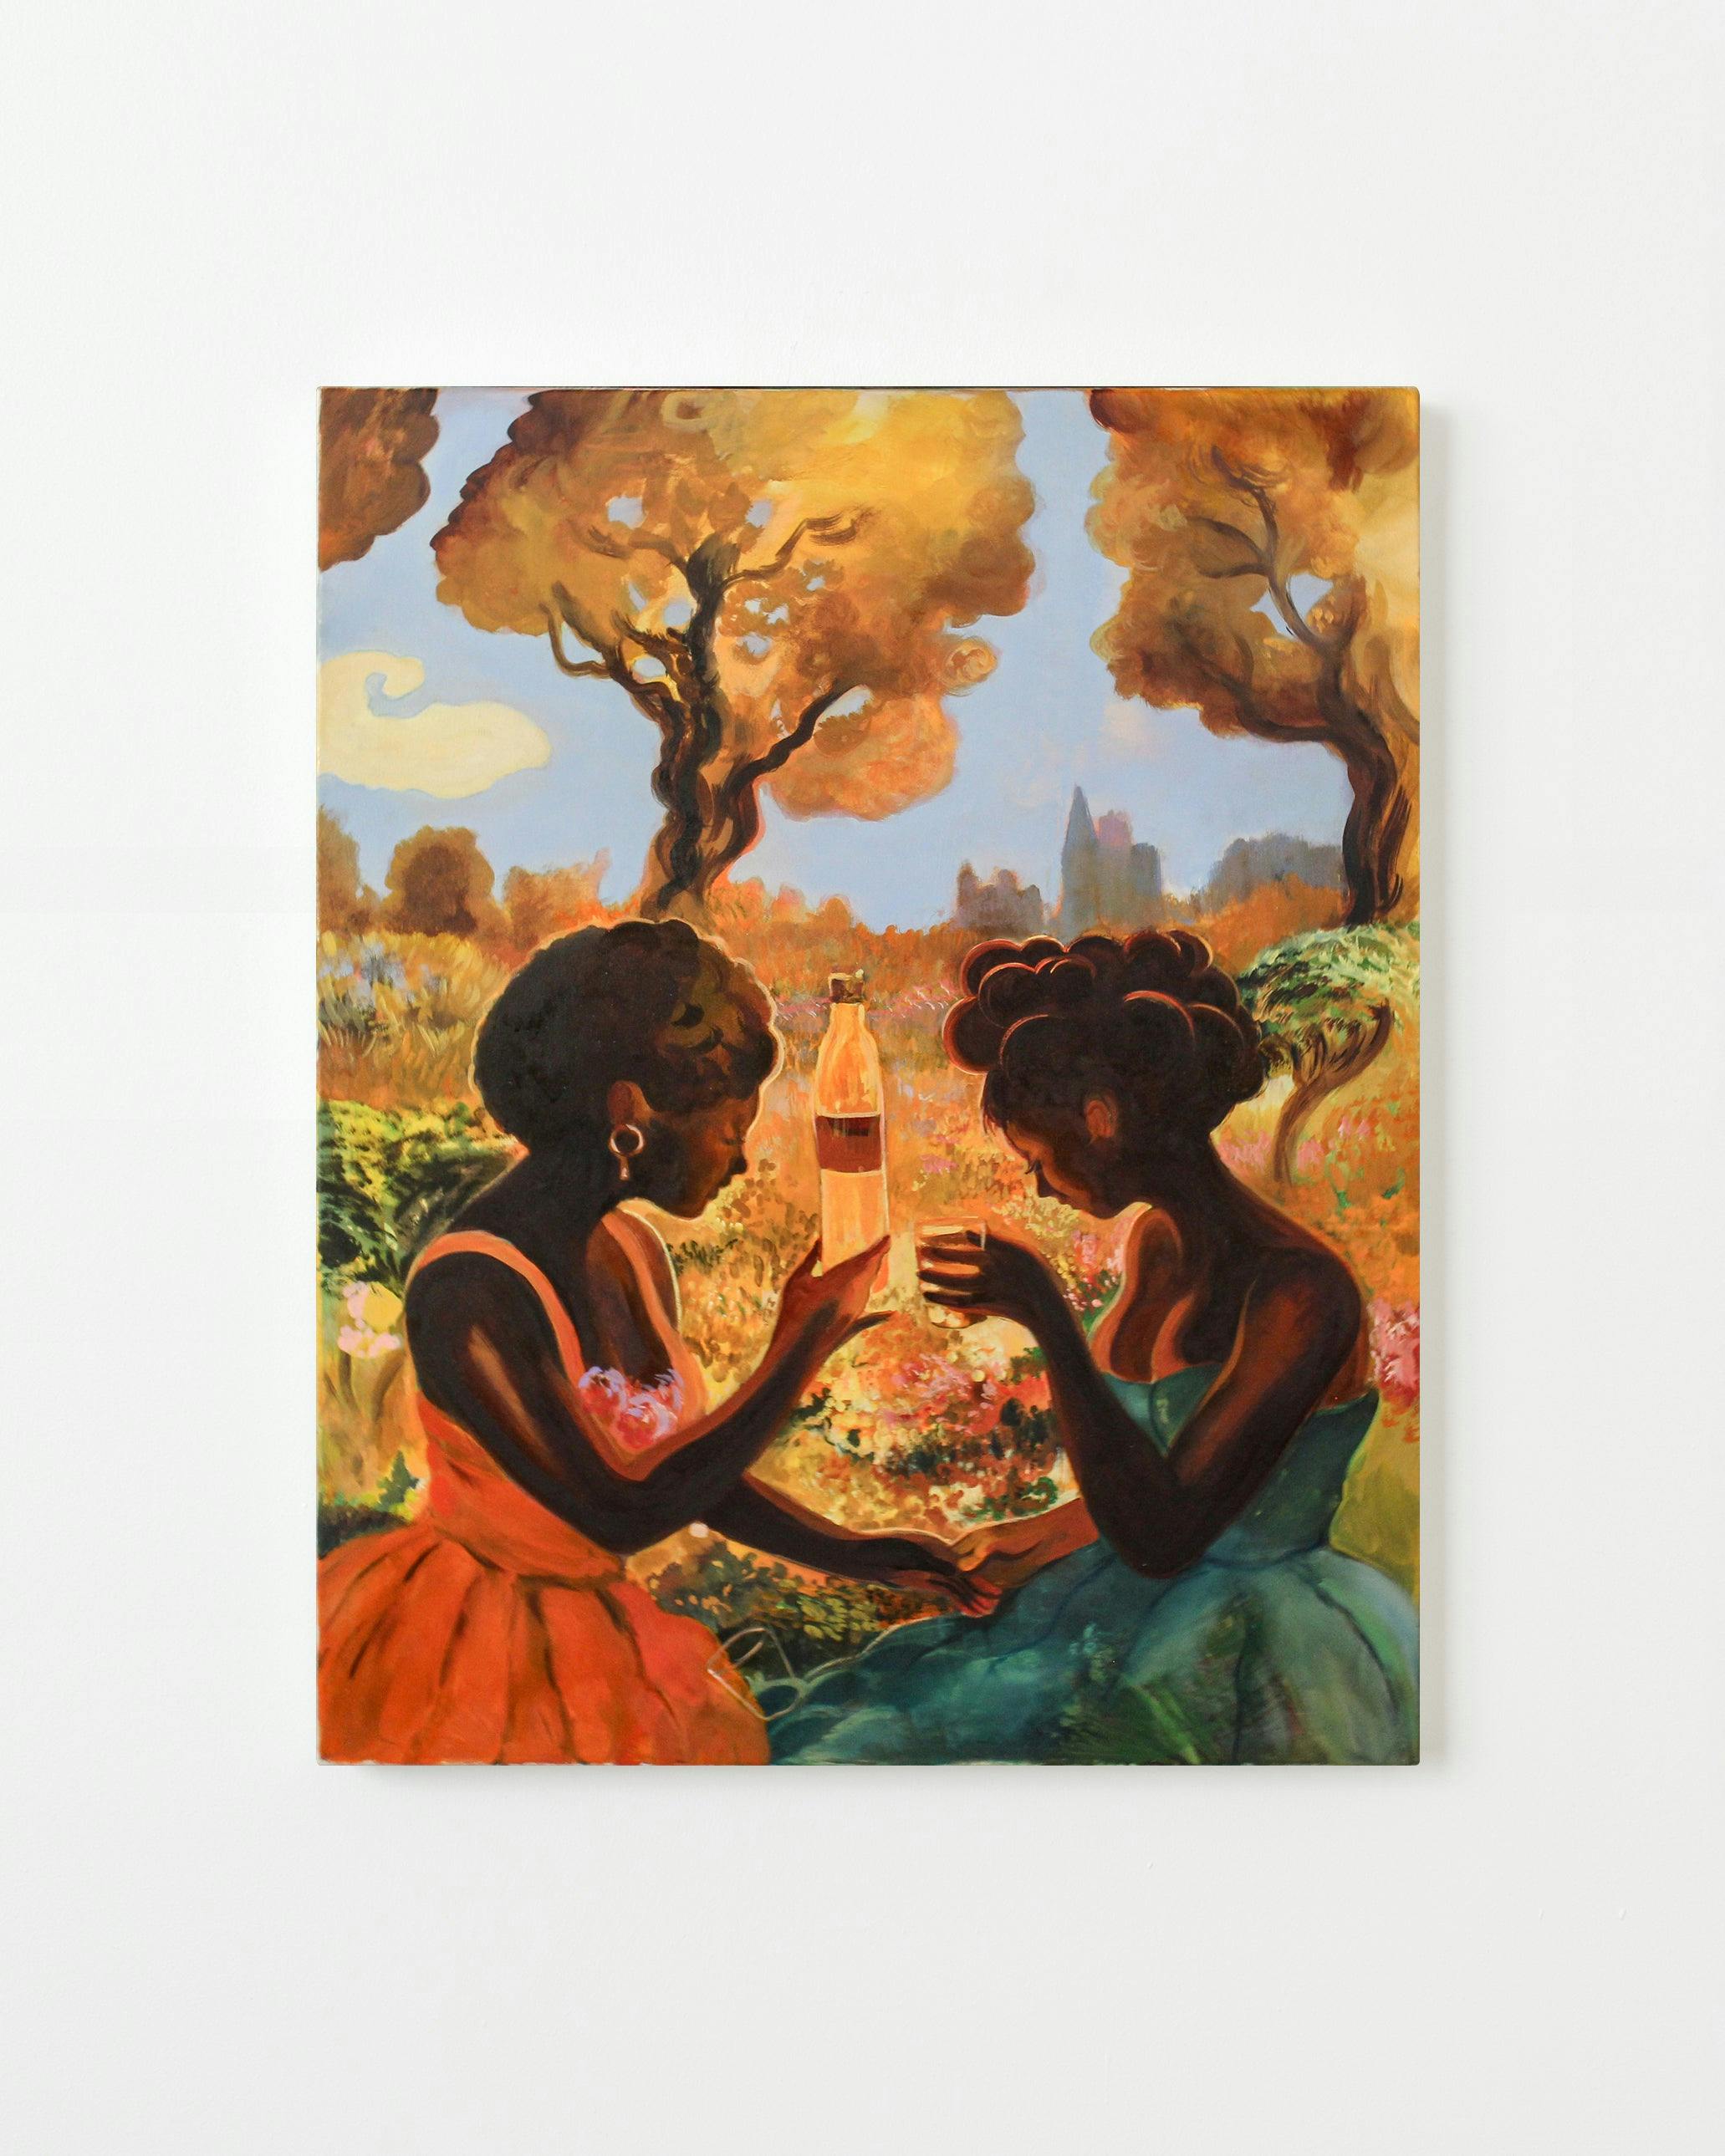 Painting by Nefertiti Jenkins titled "A Drink for Us".